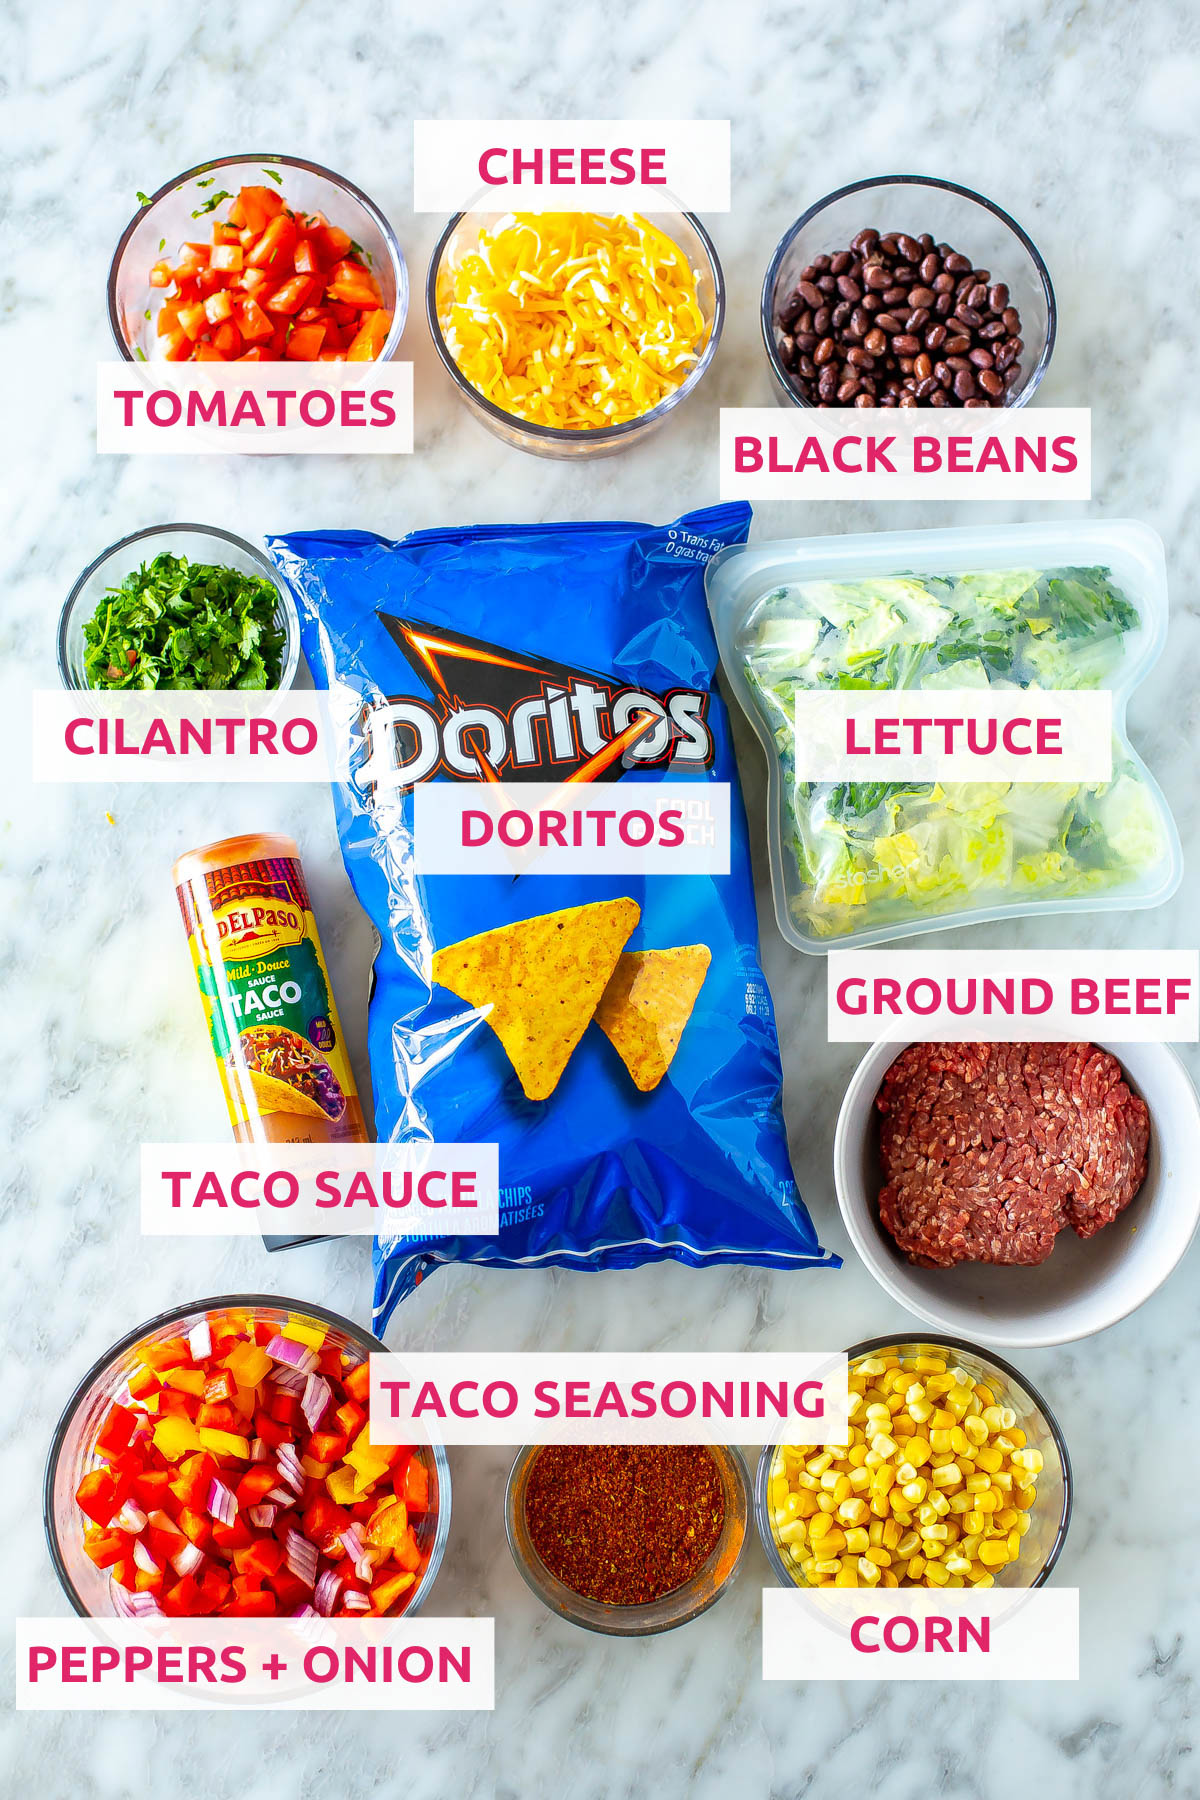 Ingredients for dorito taco salad: doritos, black beans, cheese, tomatoes, cilantro, lettuce, ground beef, taco sauce, peppers, red onion, taco seasoning and corn.